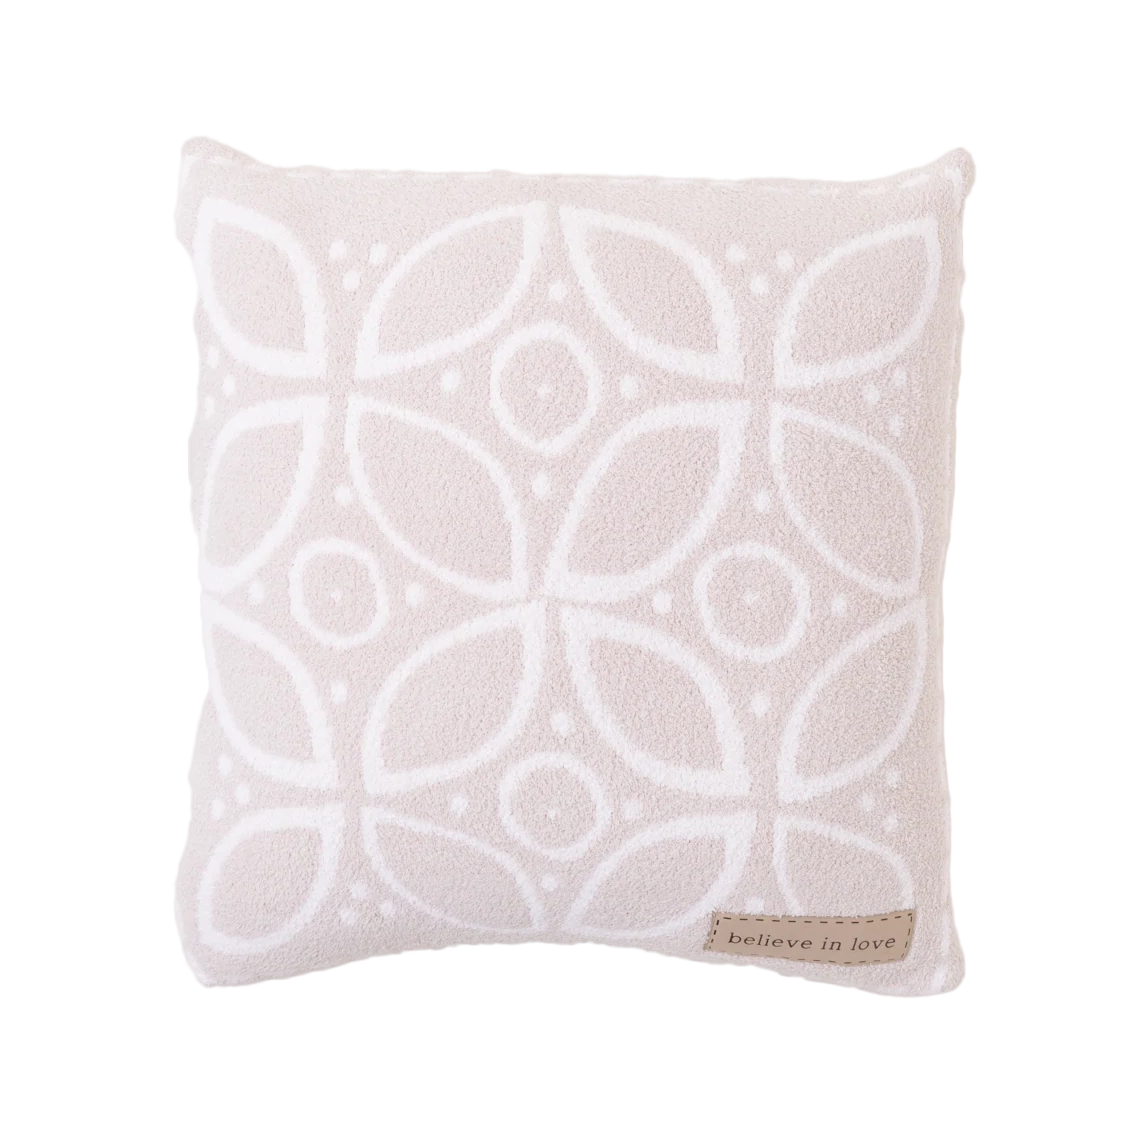 CozyChic Covered in Prayer Quote Pillow